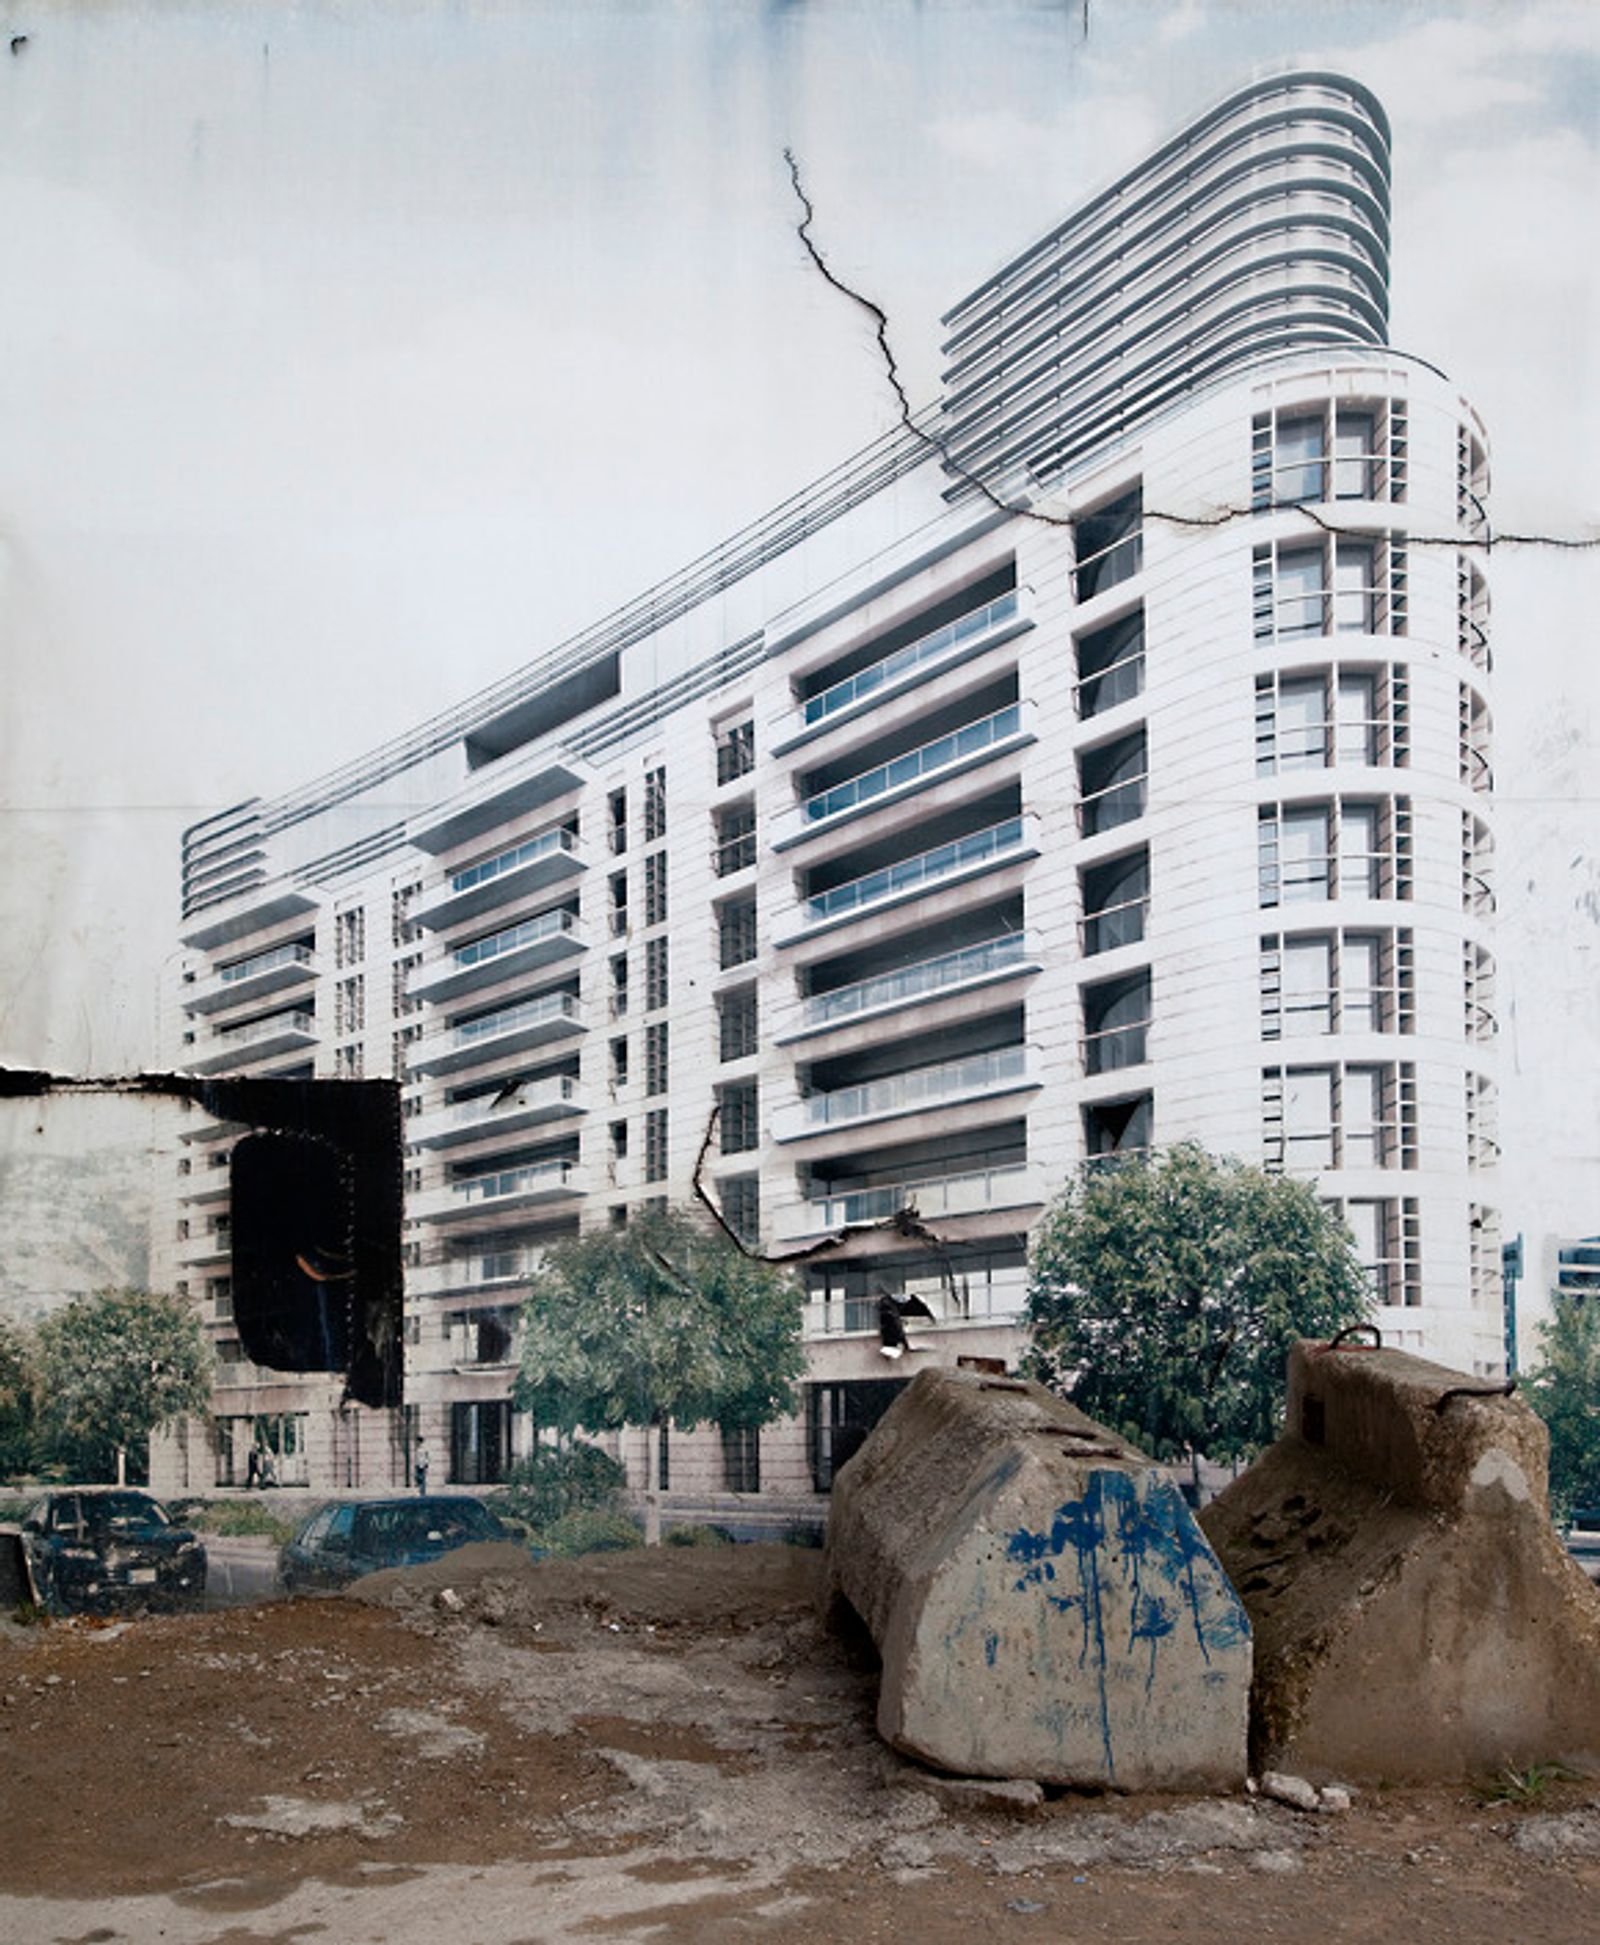 © Randa Mirza - Image from the Beirutopia photography project